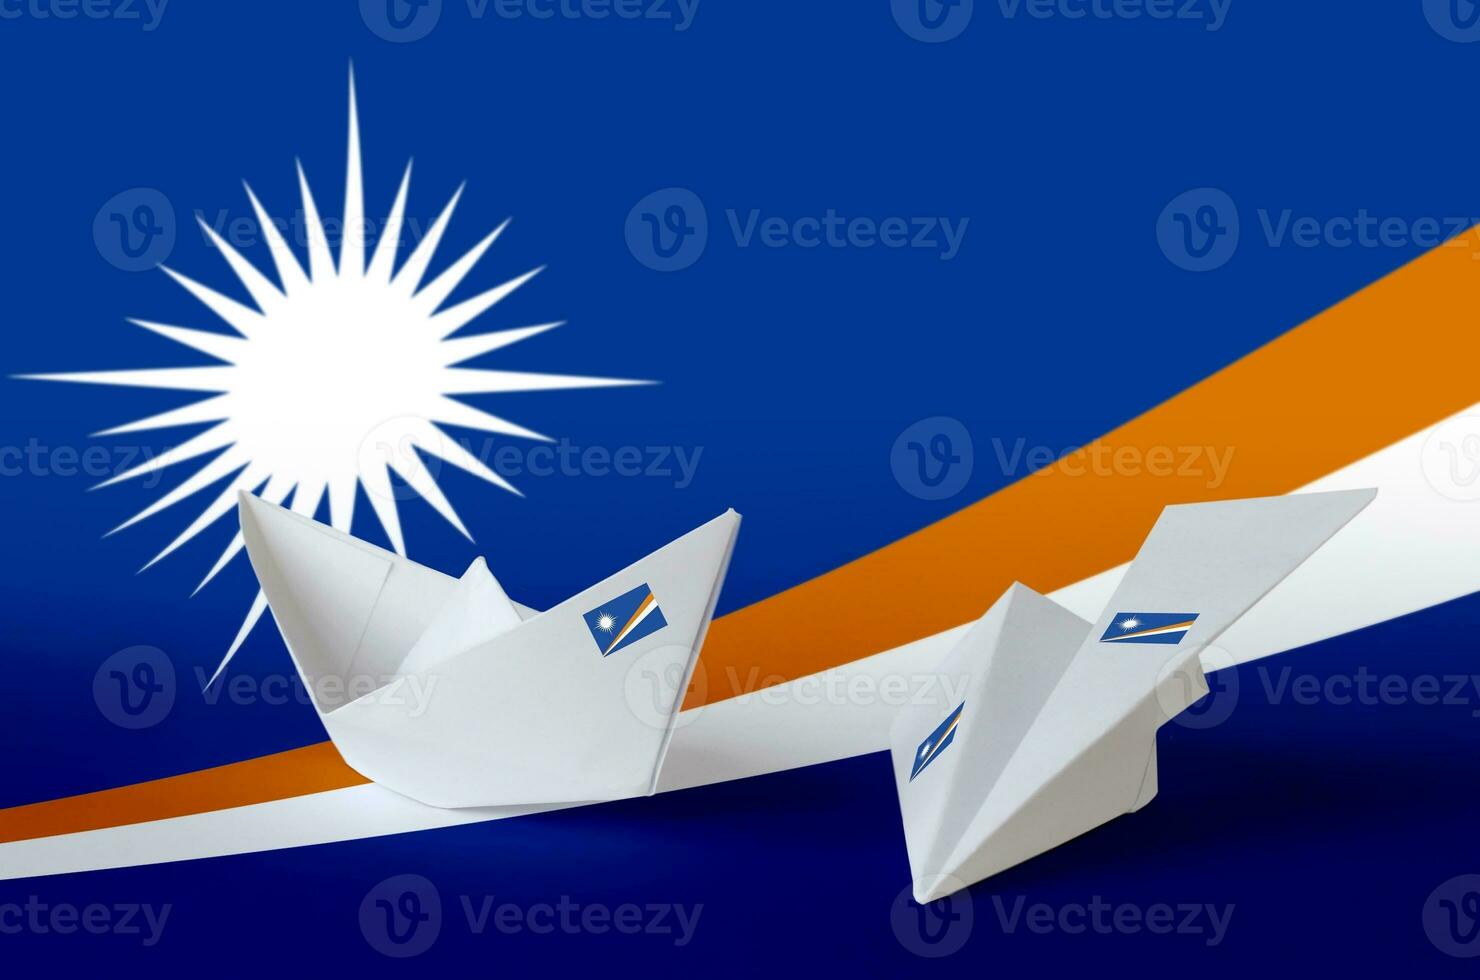 Marshall Islands flag depicted on paper origami airplane and boat. Handmade arts concept photo